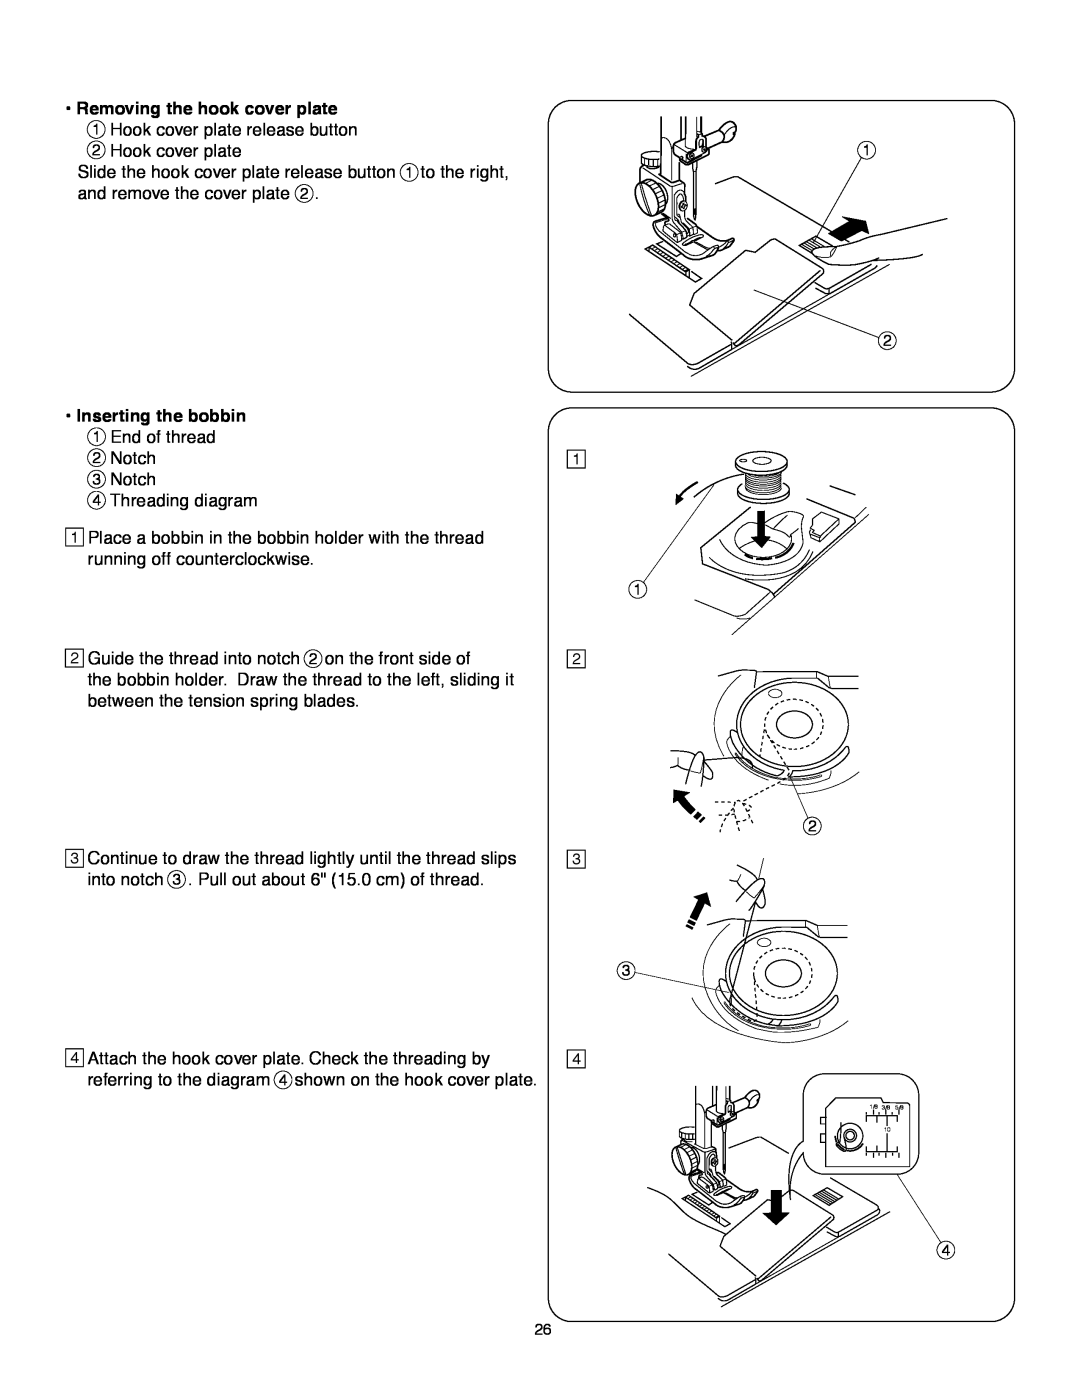 Janome MS-5027 instruction manual Removing the hook cover plate, Inserting the bobbin 1 End of thread 